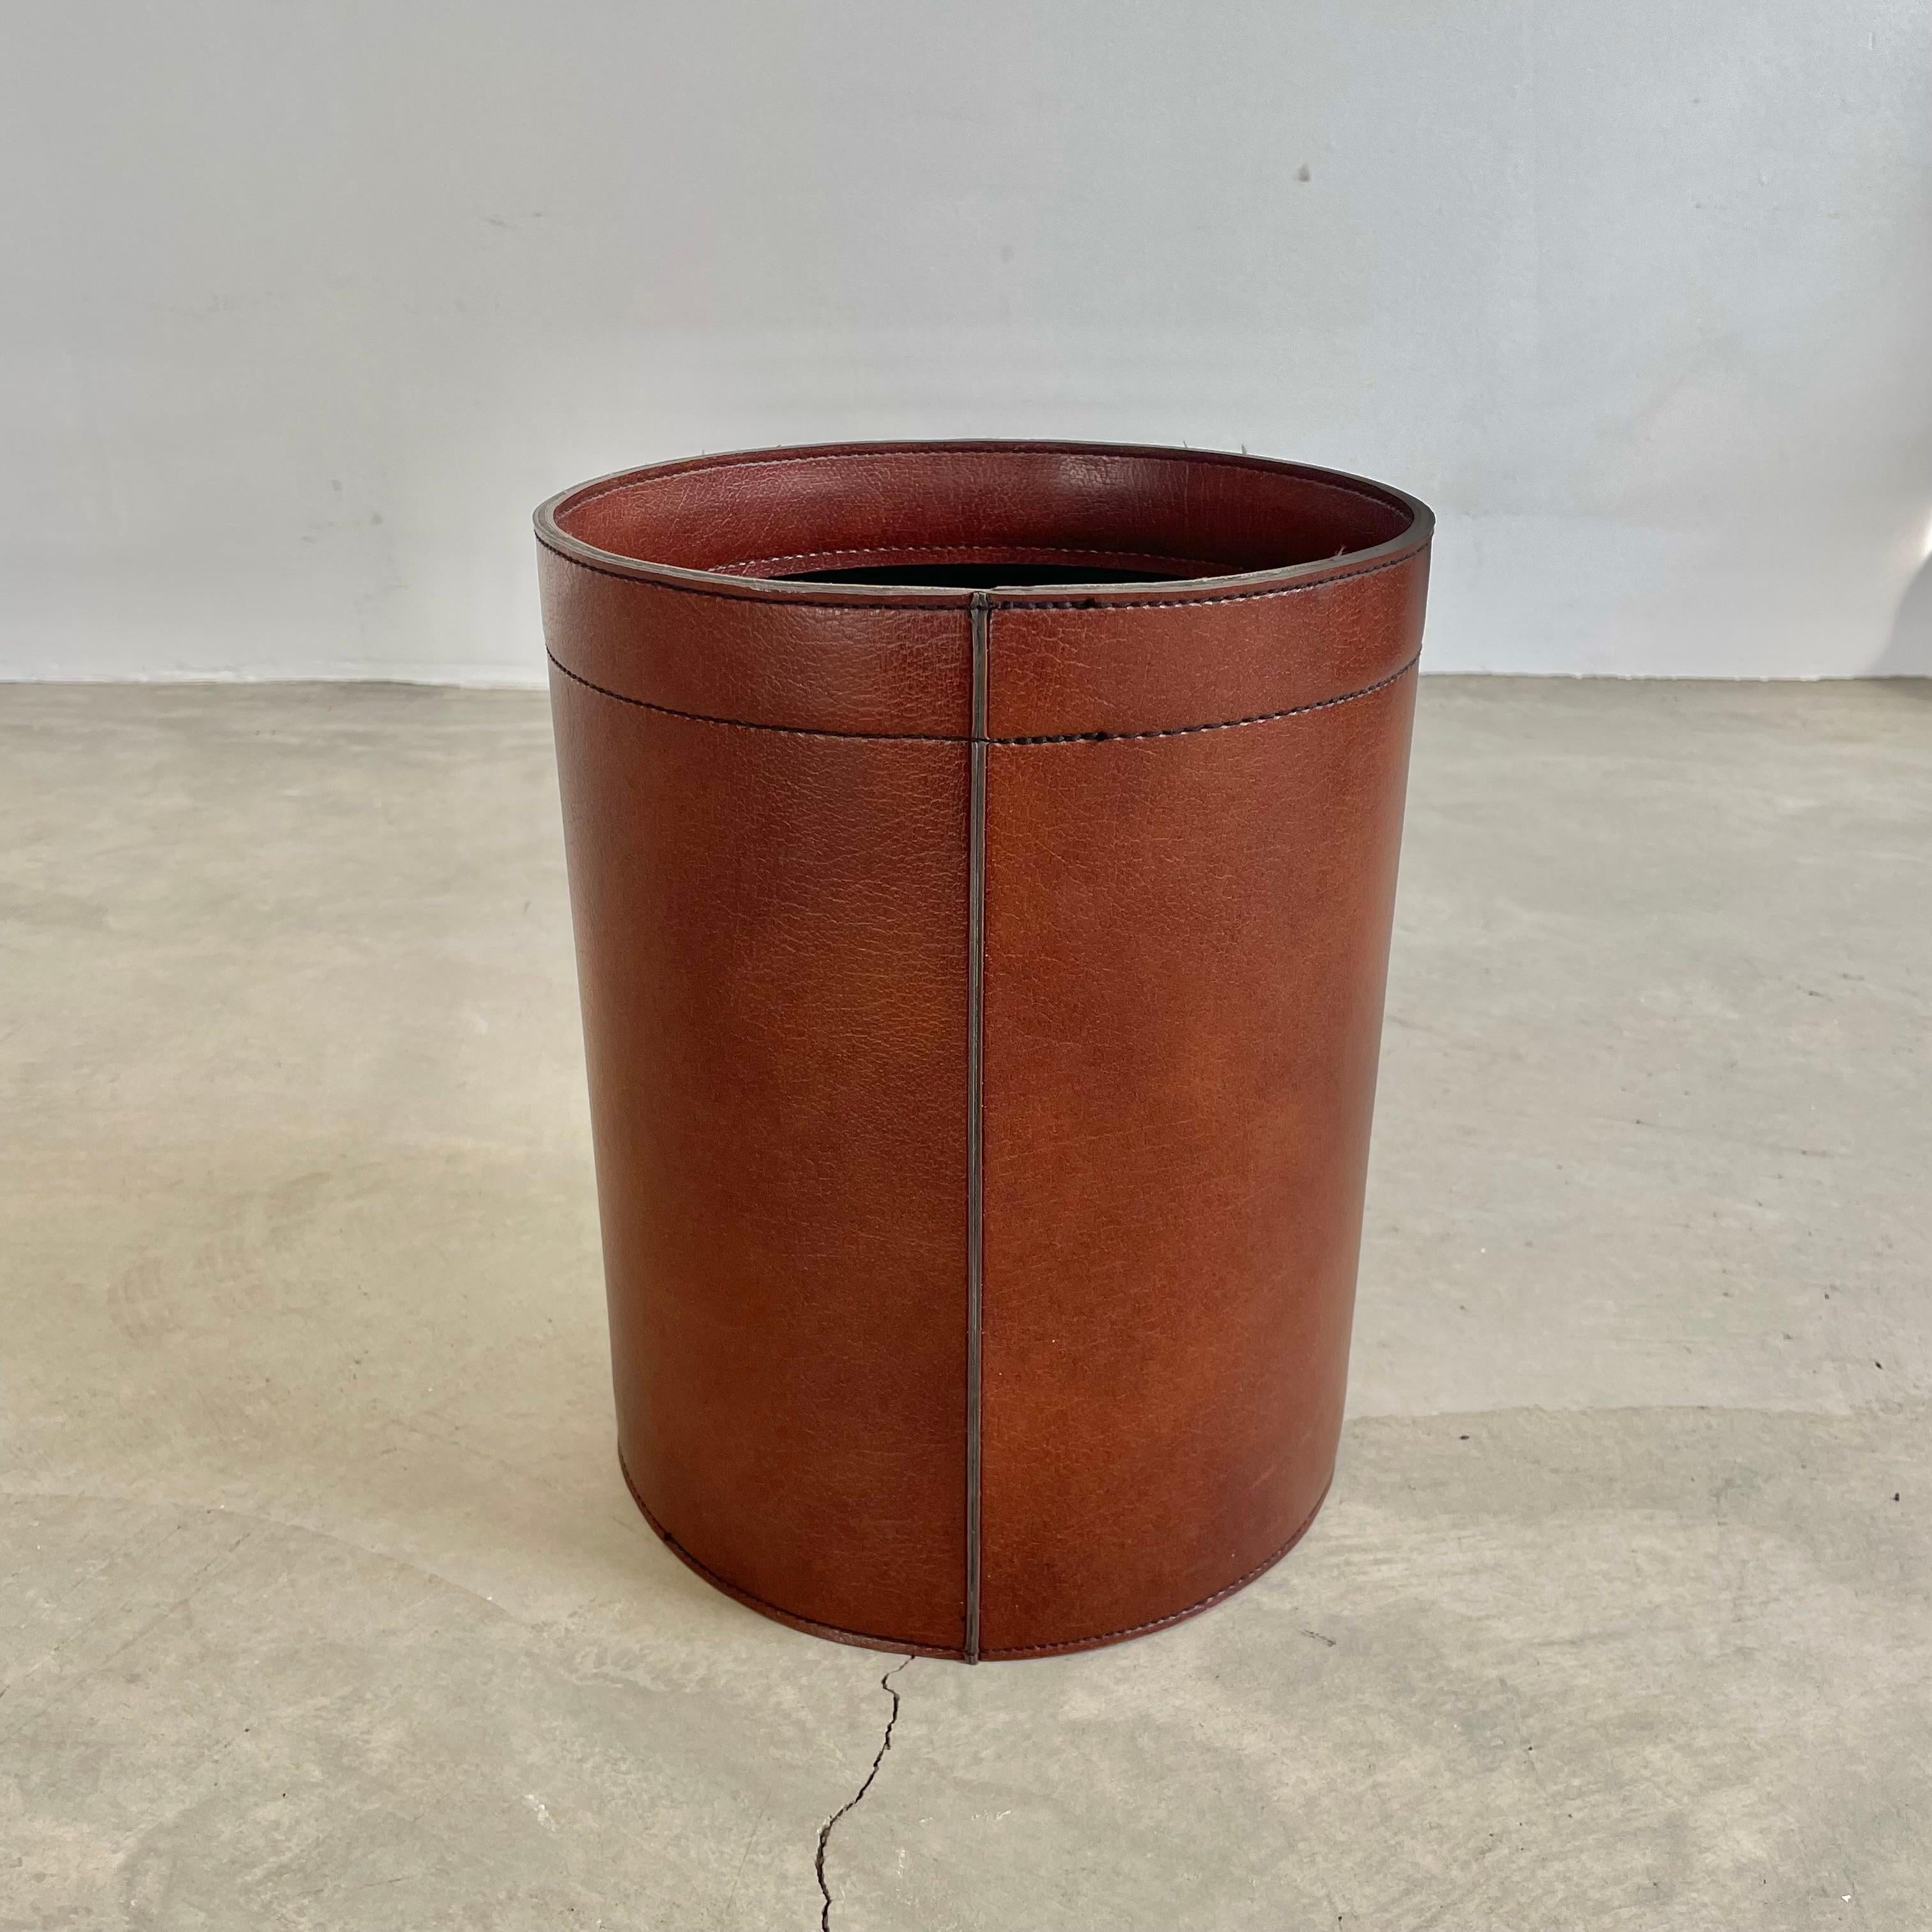 Beautiful waste bin in brown vinyl with a leather texture given to the body. Sturdy cylindrical body with reinforced interior and base. Great color and good vintage condition. 